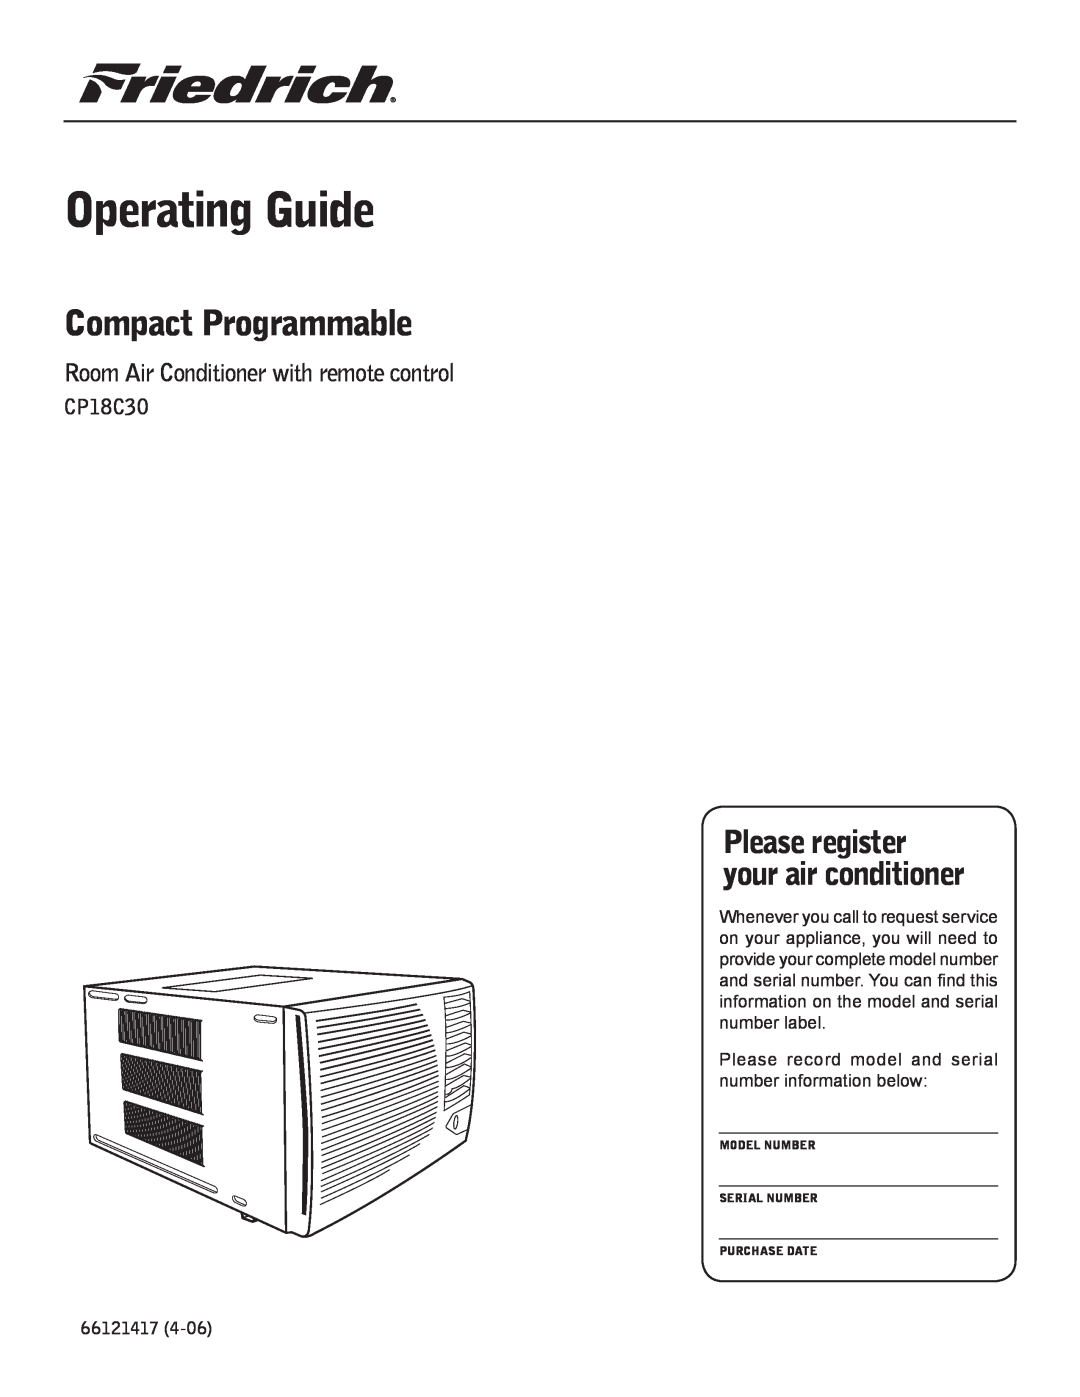 Friedrich CP18C30 manual Compact Programmable, Room Air Conditioner with remote control, 66121417, Operating Guide 